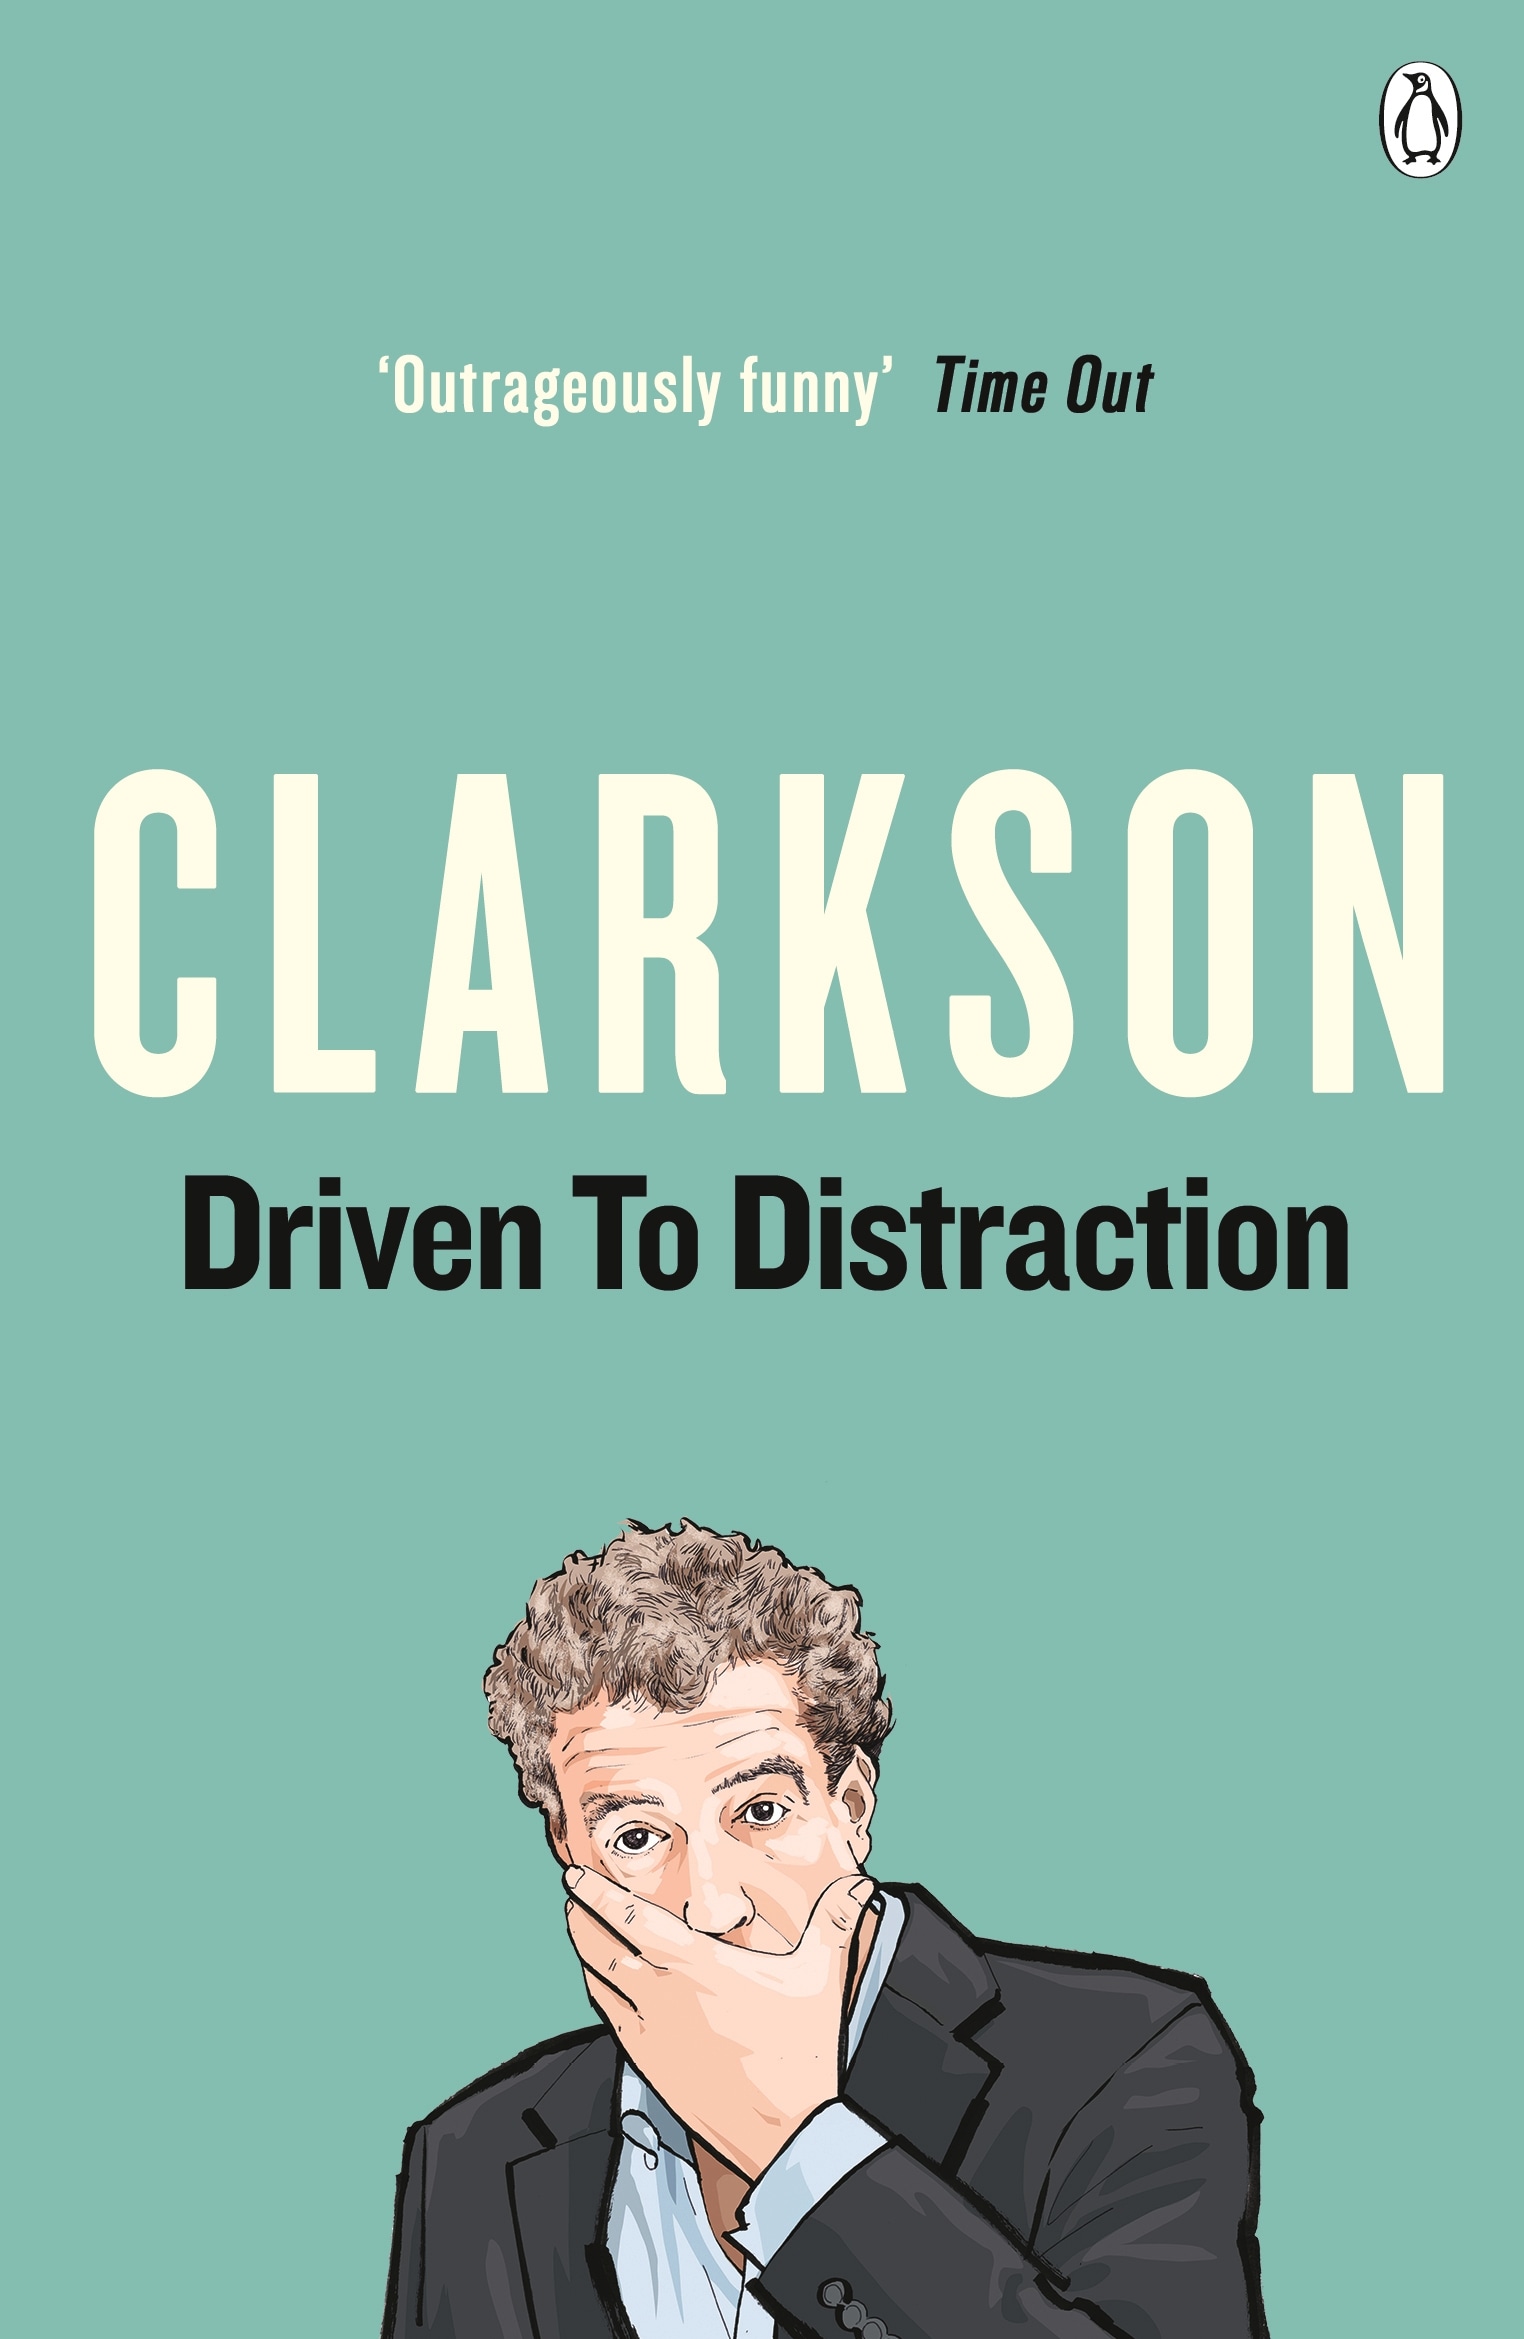 Book “Driven to Distraction” by Jeremy Clarkson — May 27, 2010